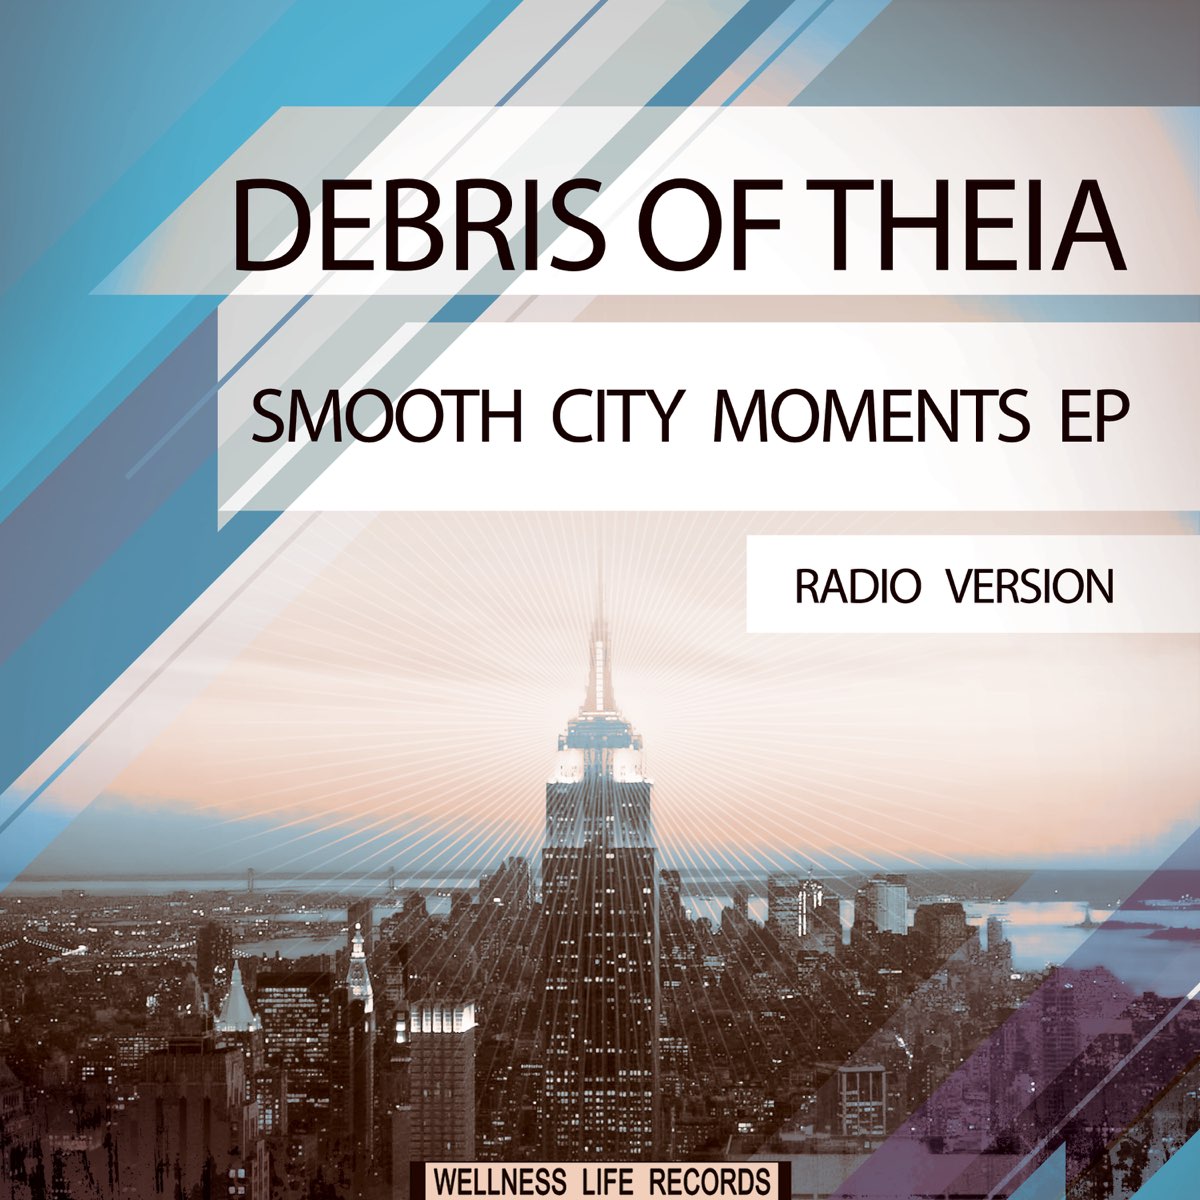 Smooth City Moments EP (Radio Version) by Debris of Theia on Apple Music